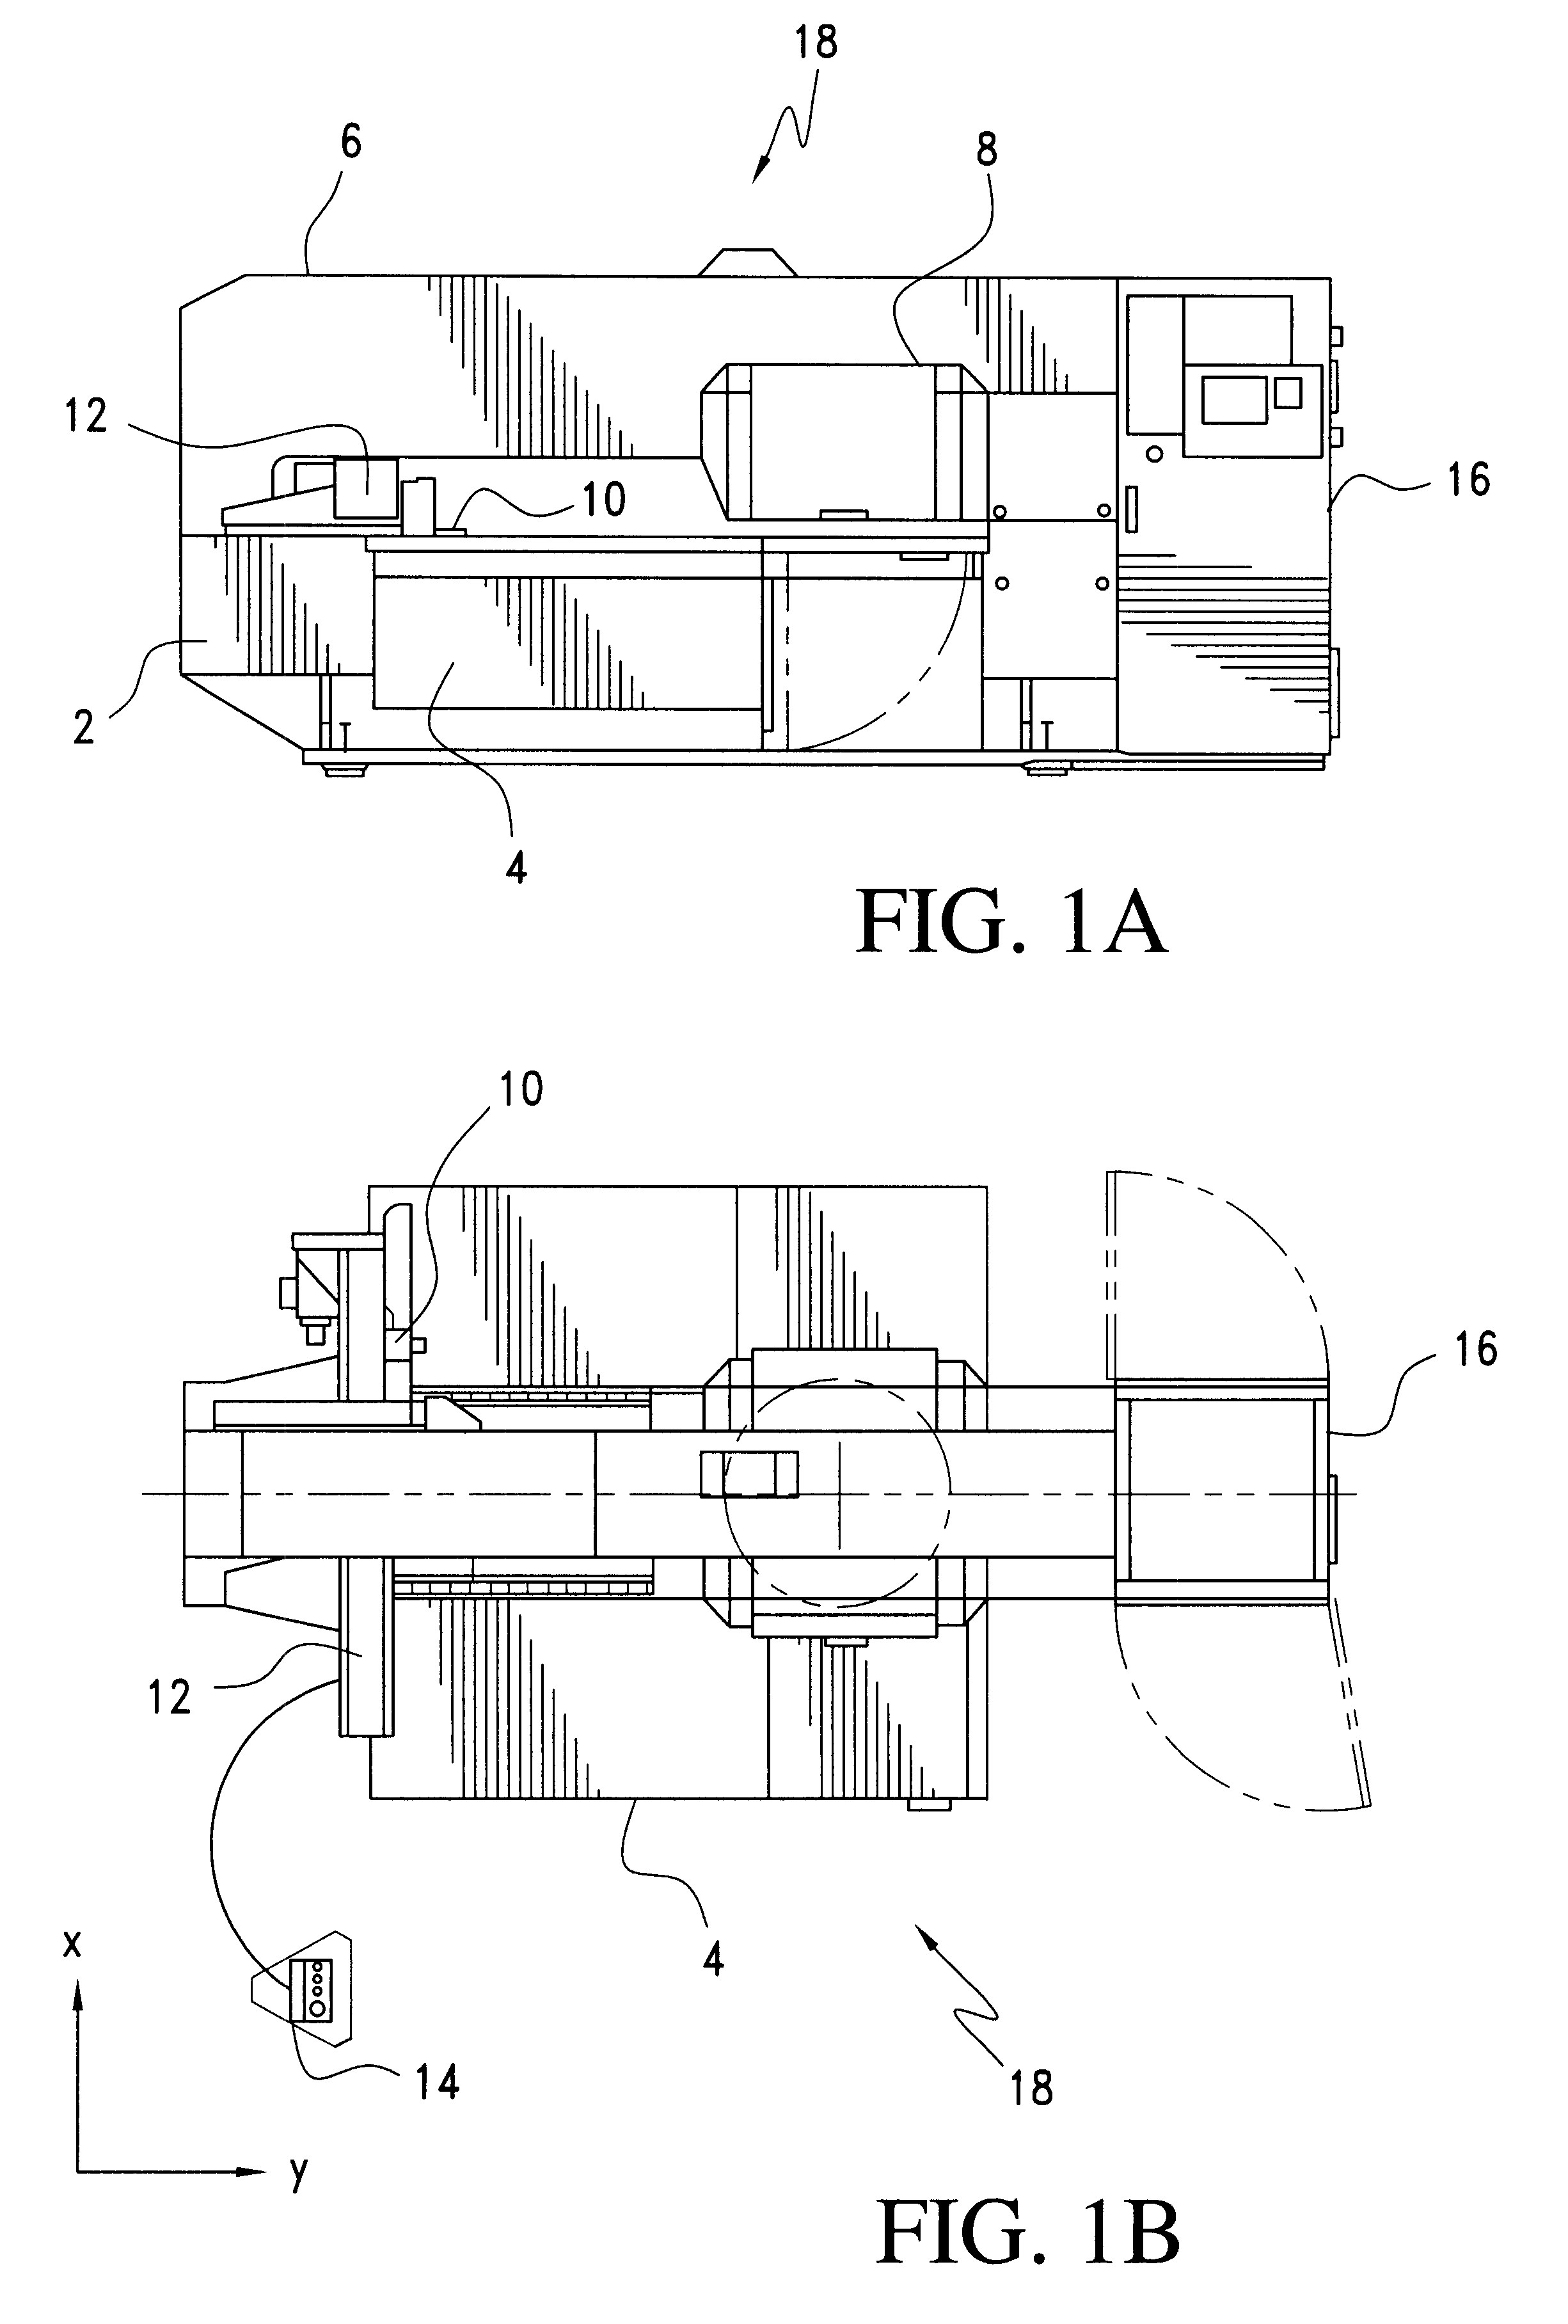 Apparatus and method therefor of maximizing the production run speed of a sheet fabrication machine